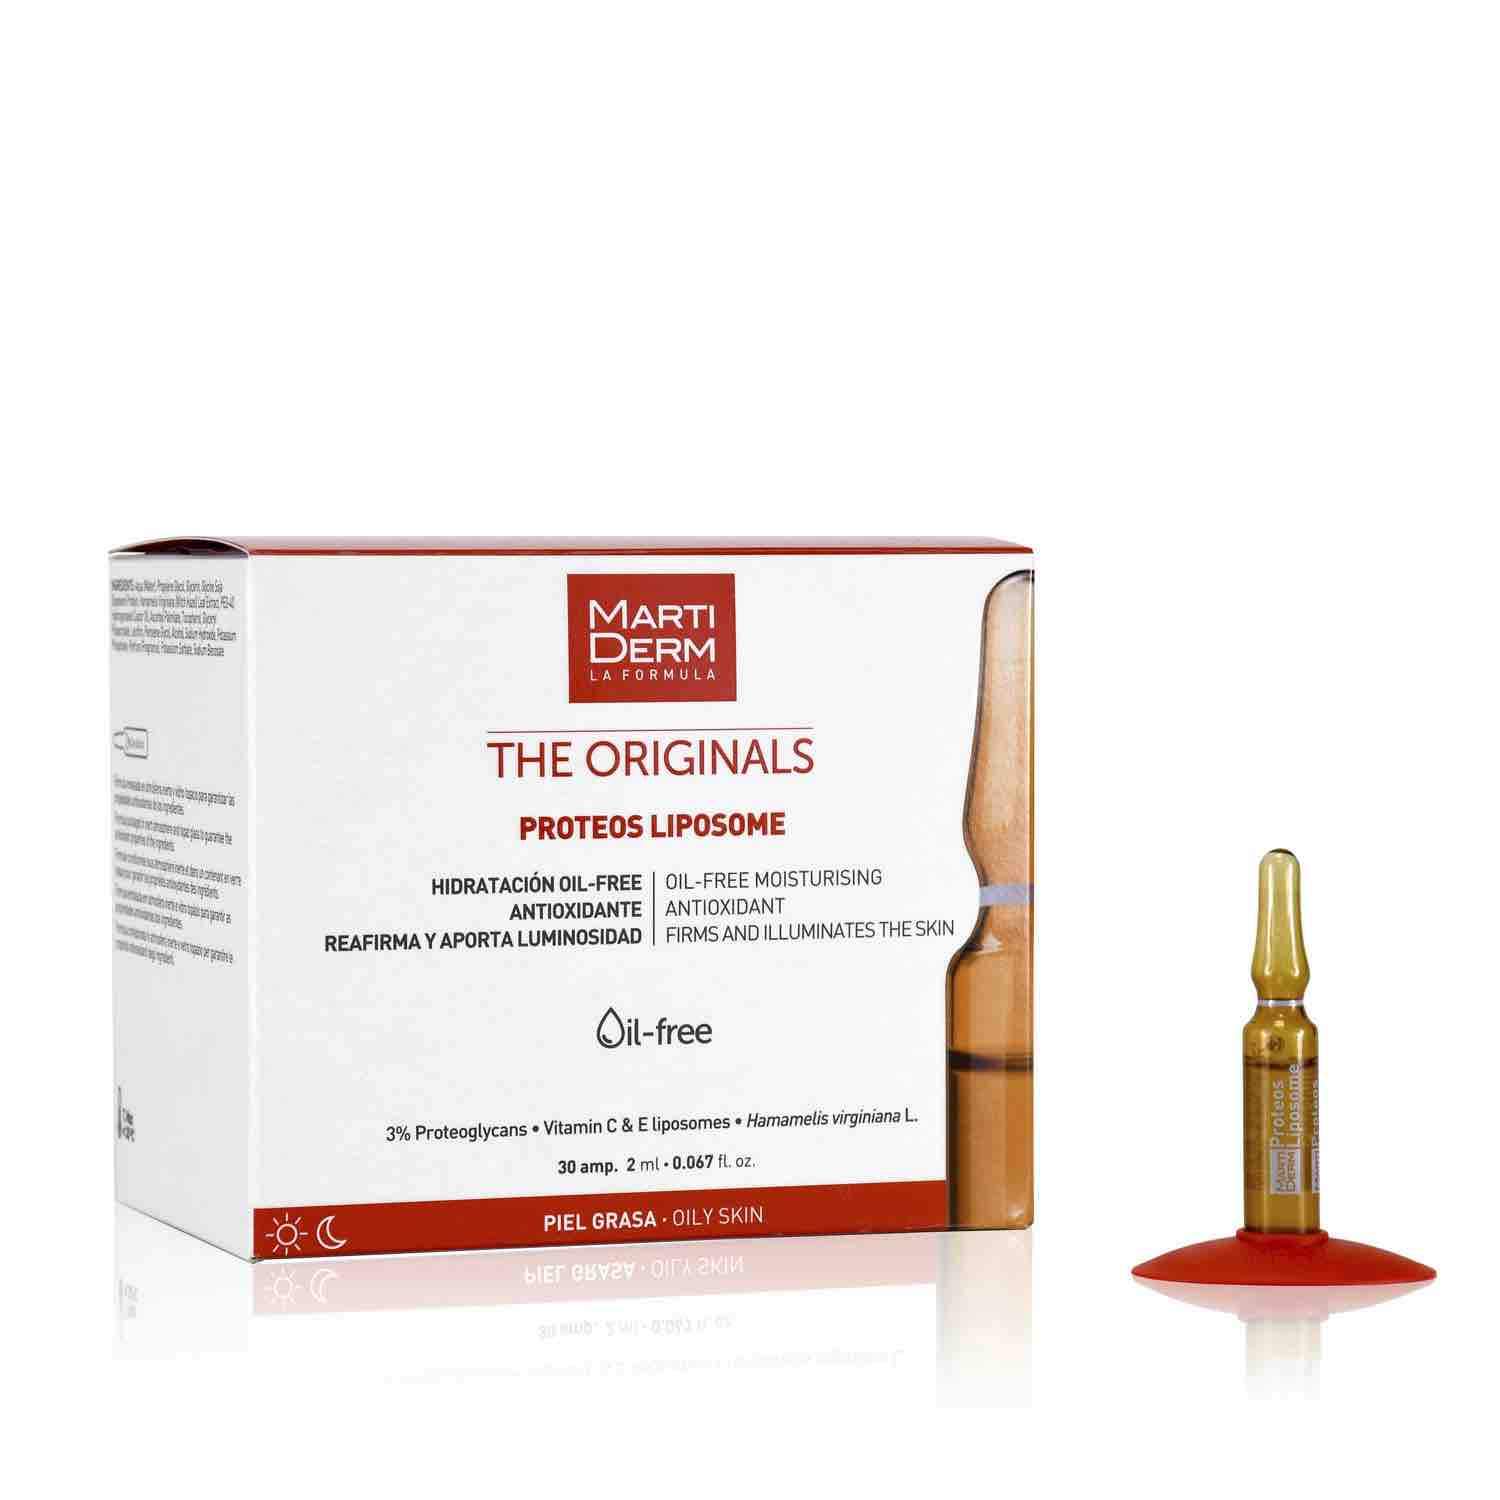 Shop Proteos Liposome 30 Ampoules from Martiderm on SublimeLife.in. Best for closing pores and toning skin.